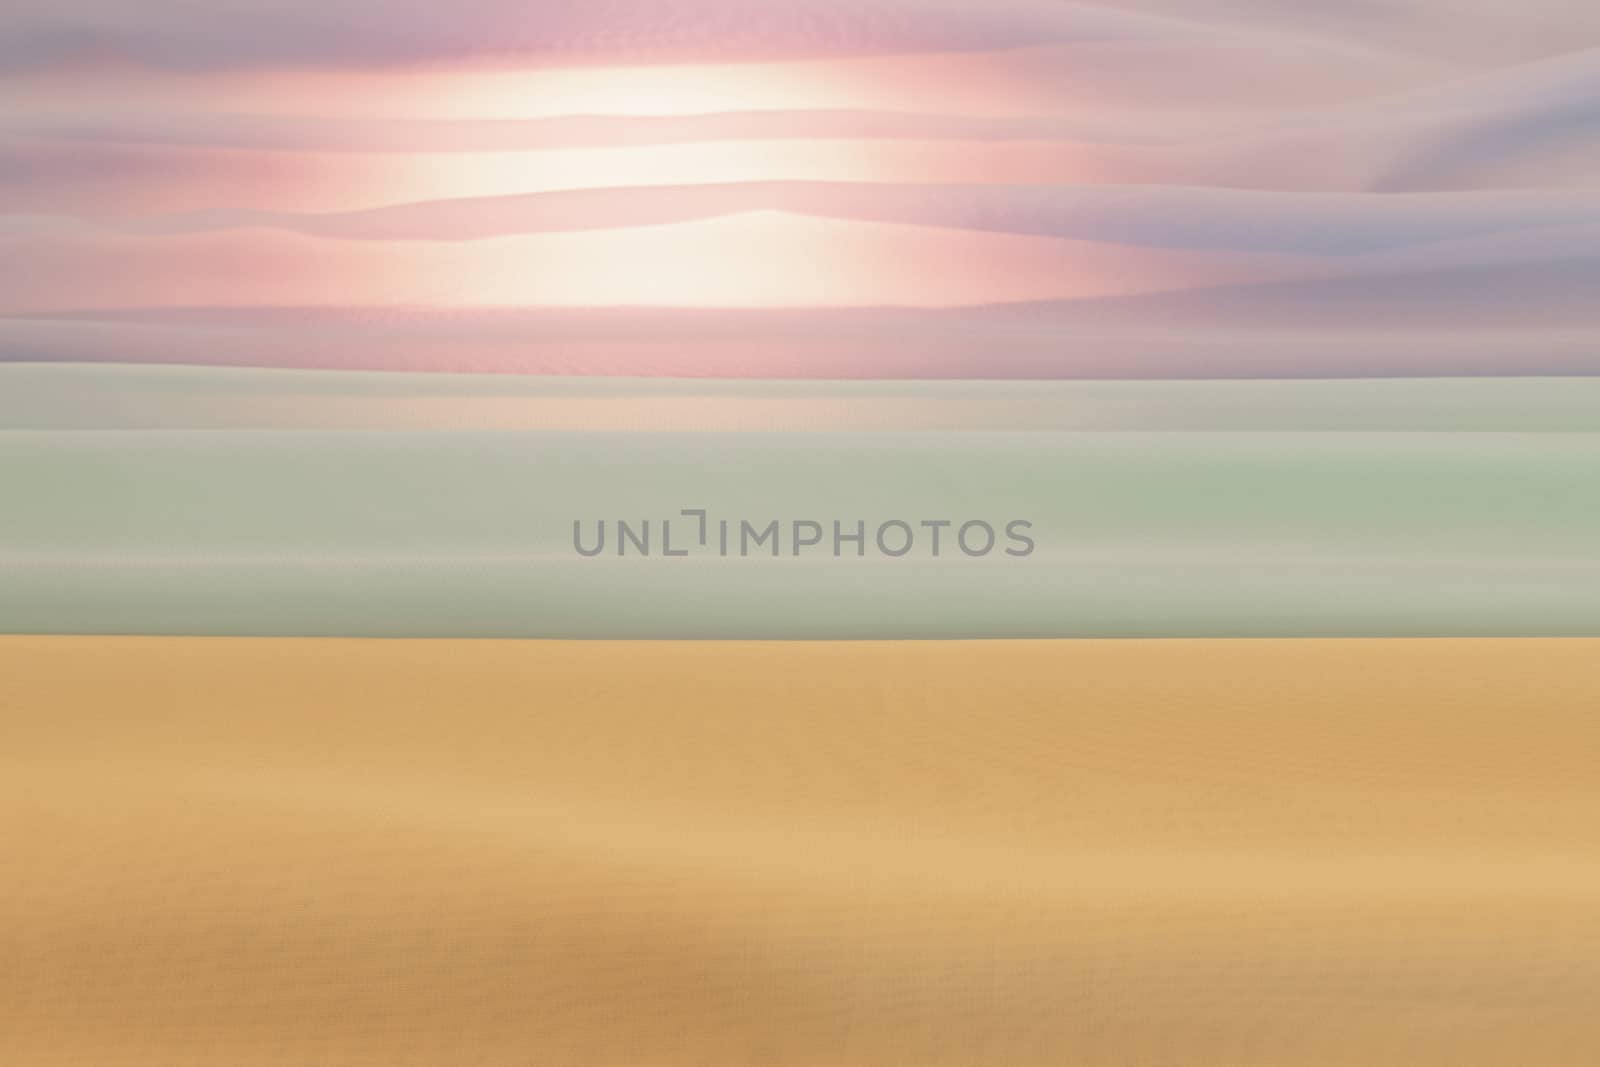 Abstract view of a beach landscape through towels
